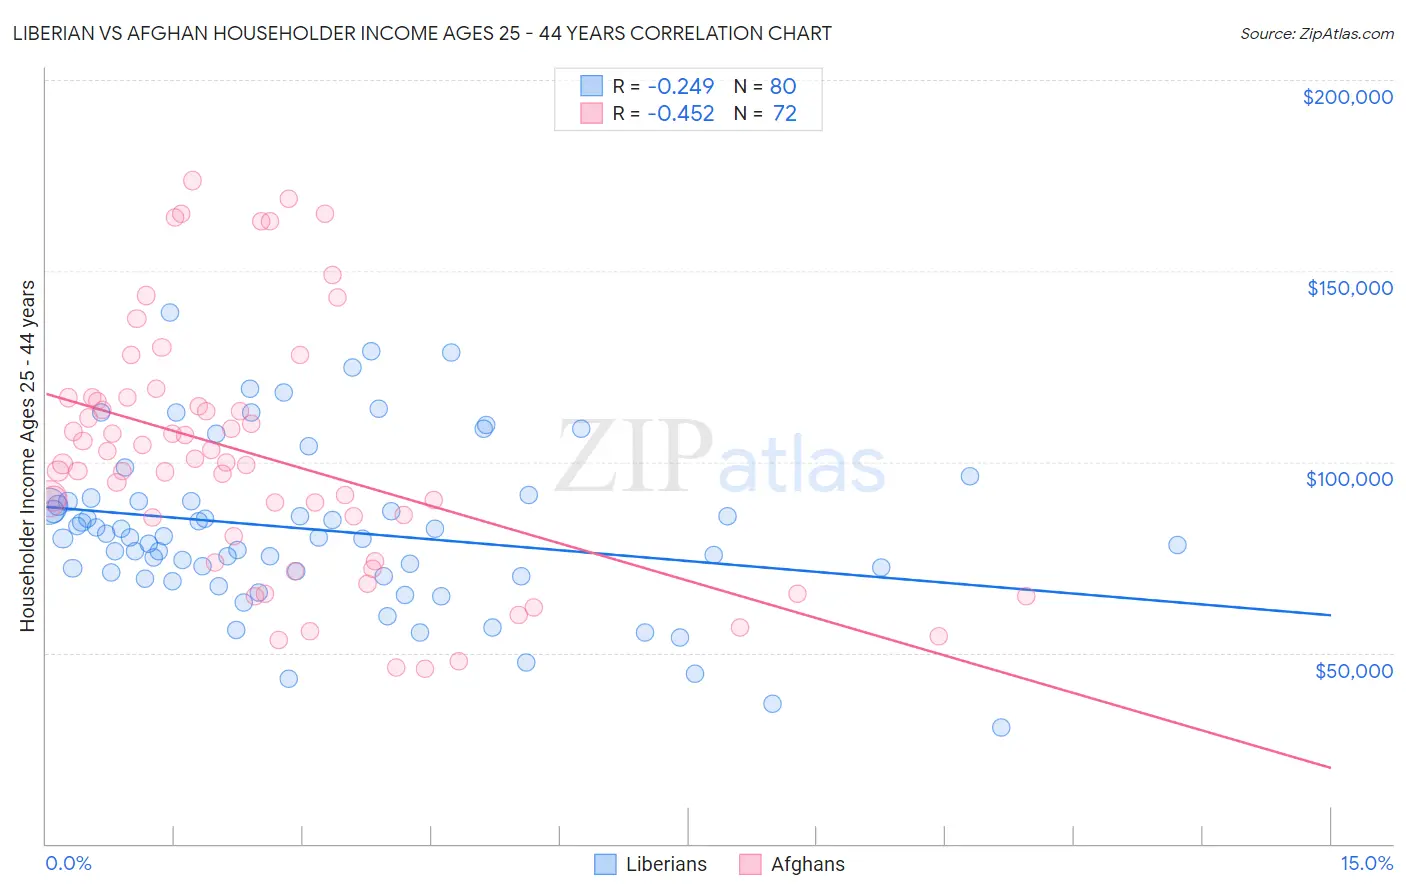 Liberian vs Afghan Householder Income Ages 25 - 44 years